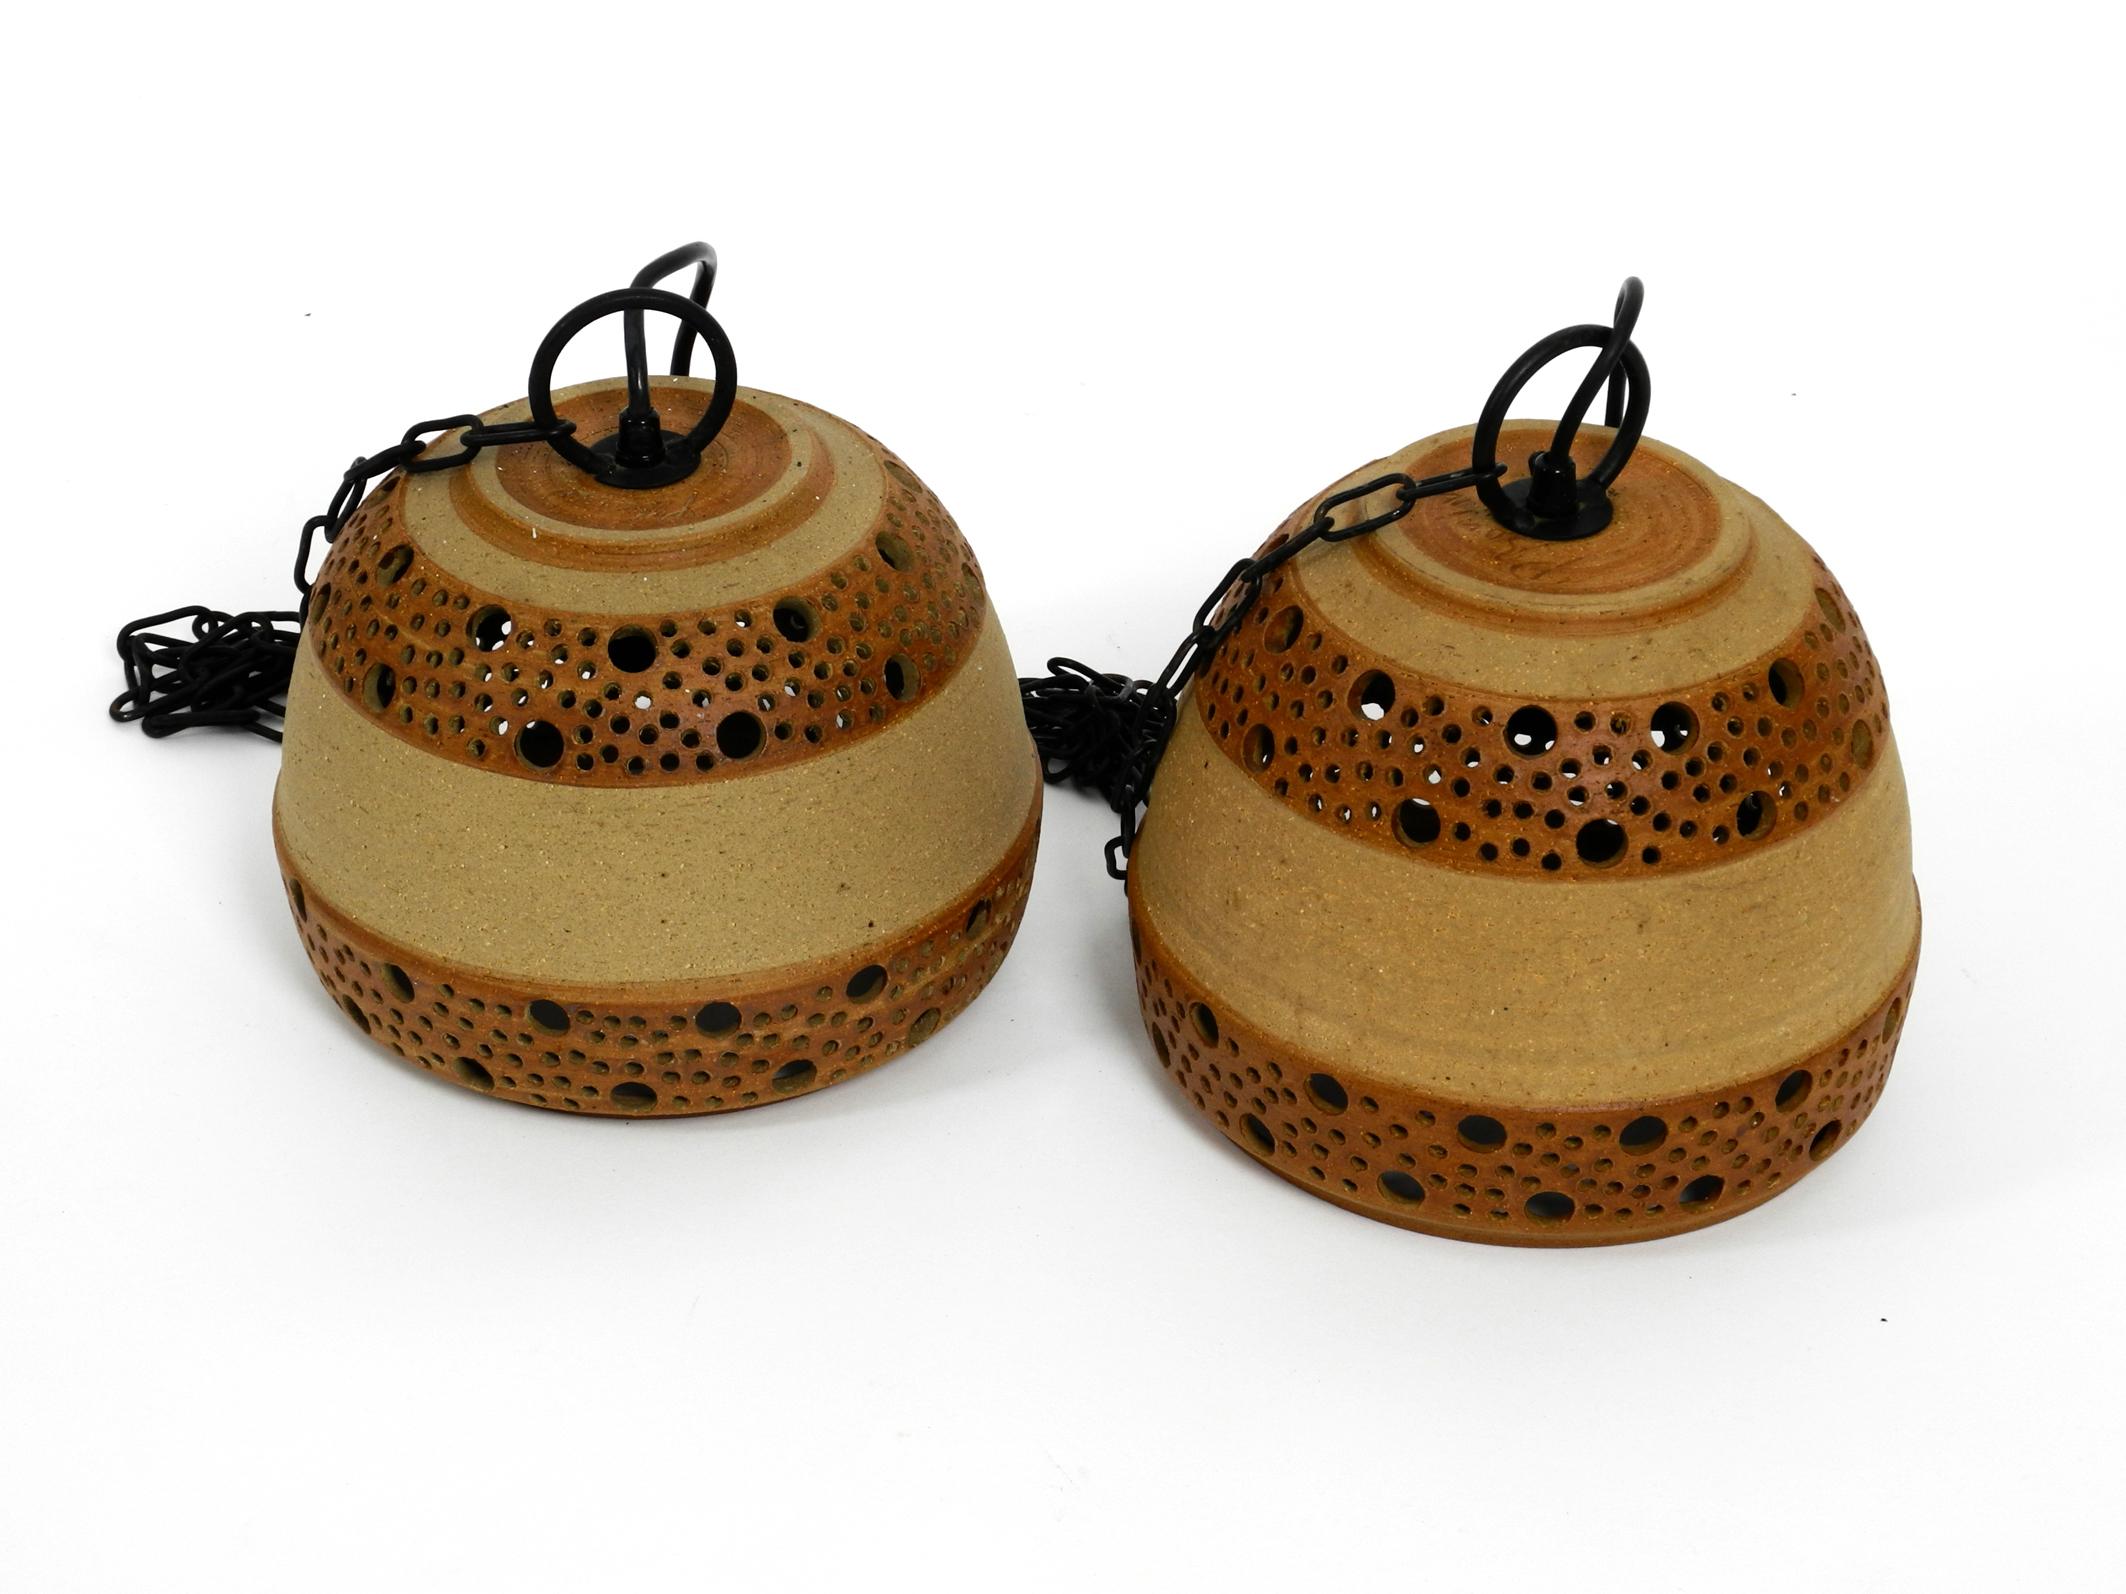 Set of 2 rare and beautiful 1960s ceramic pendant lamps.
Made by the famous ceramic designer P. Bovin, Bornholm. Made in Denmark
Great typical Scandinavian design. Lamp shade is in brown two-tone ceramic.
Great pleasant light. All two lamps are